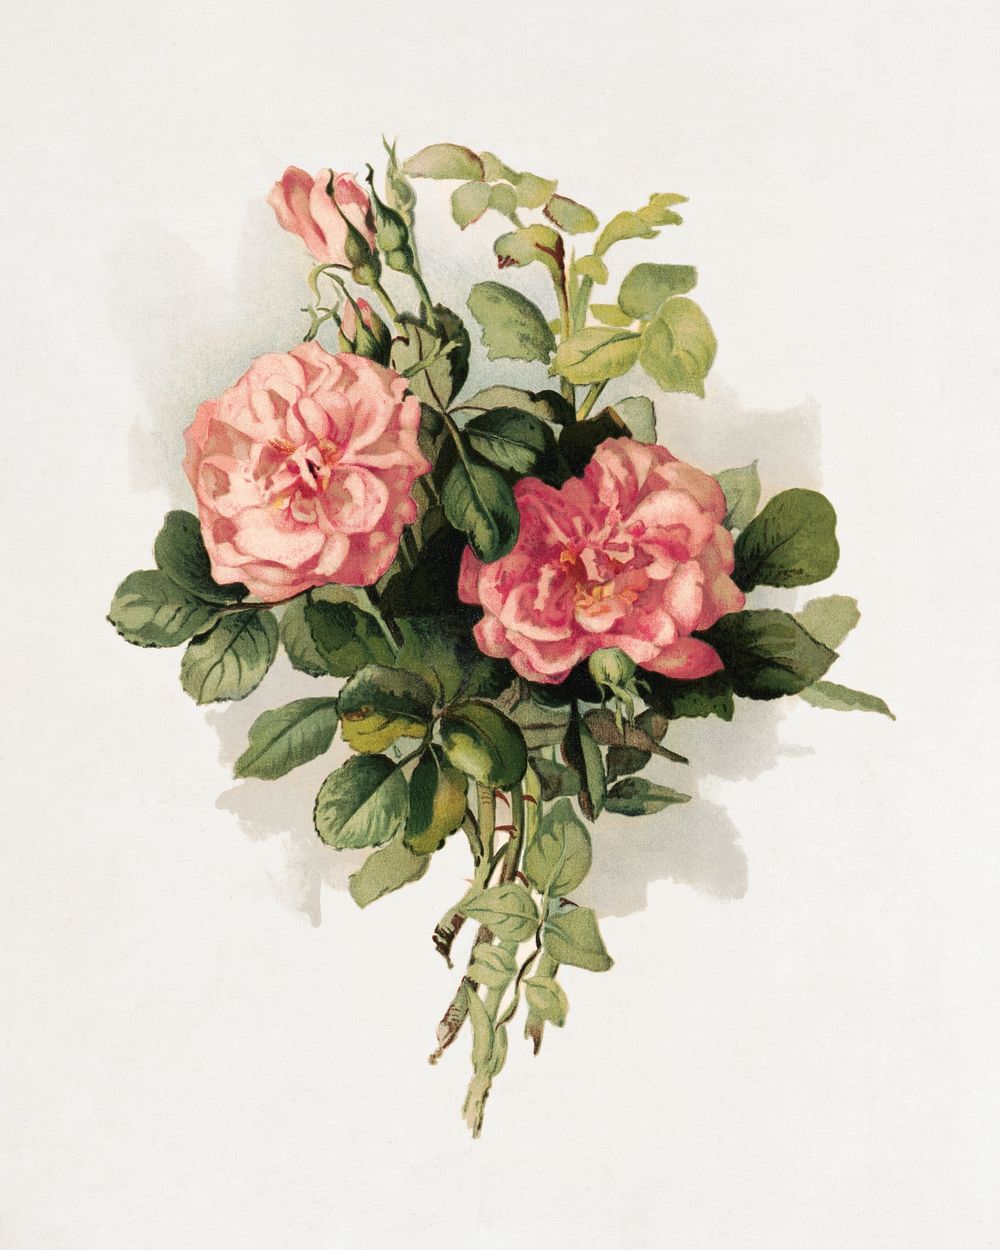 Blush roses, aesthetic chromolithograph. Original public domain image by Annie Nowell Cornelia from the Library of Congress.…